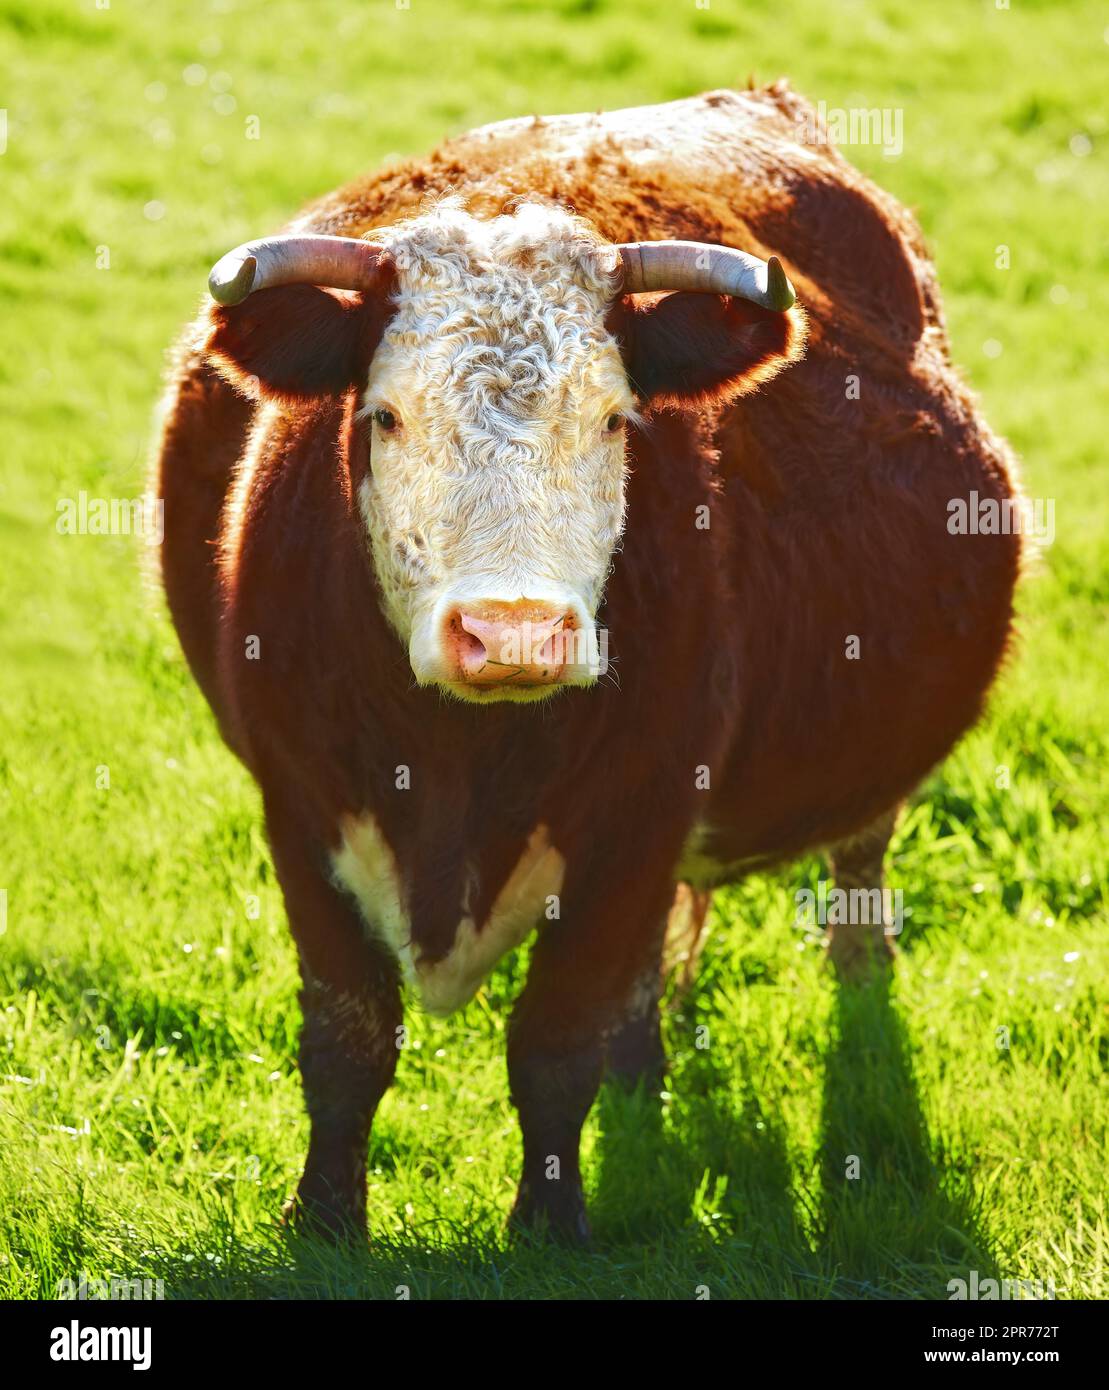 One hereford cow or bull standing alone on a farm pasture. Hairy animal isolated against green grass on a remote farmland and agriculture estate. Raising live cattle, grass fed diary farming industry Stock Photo